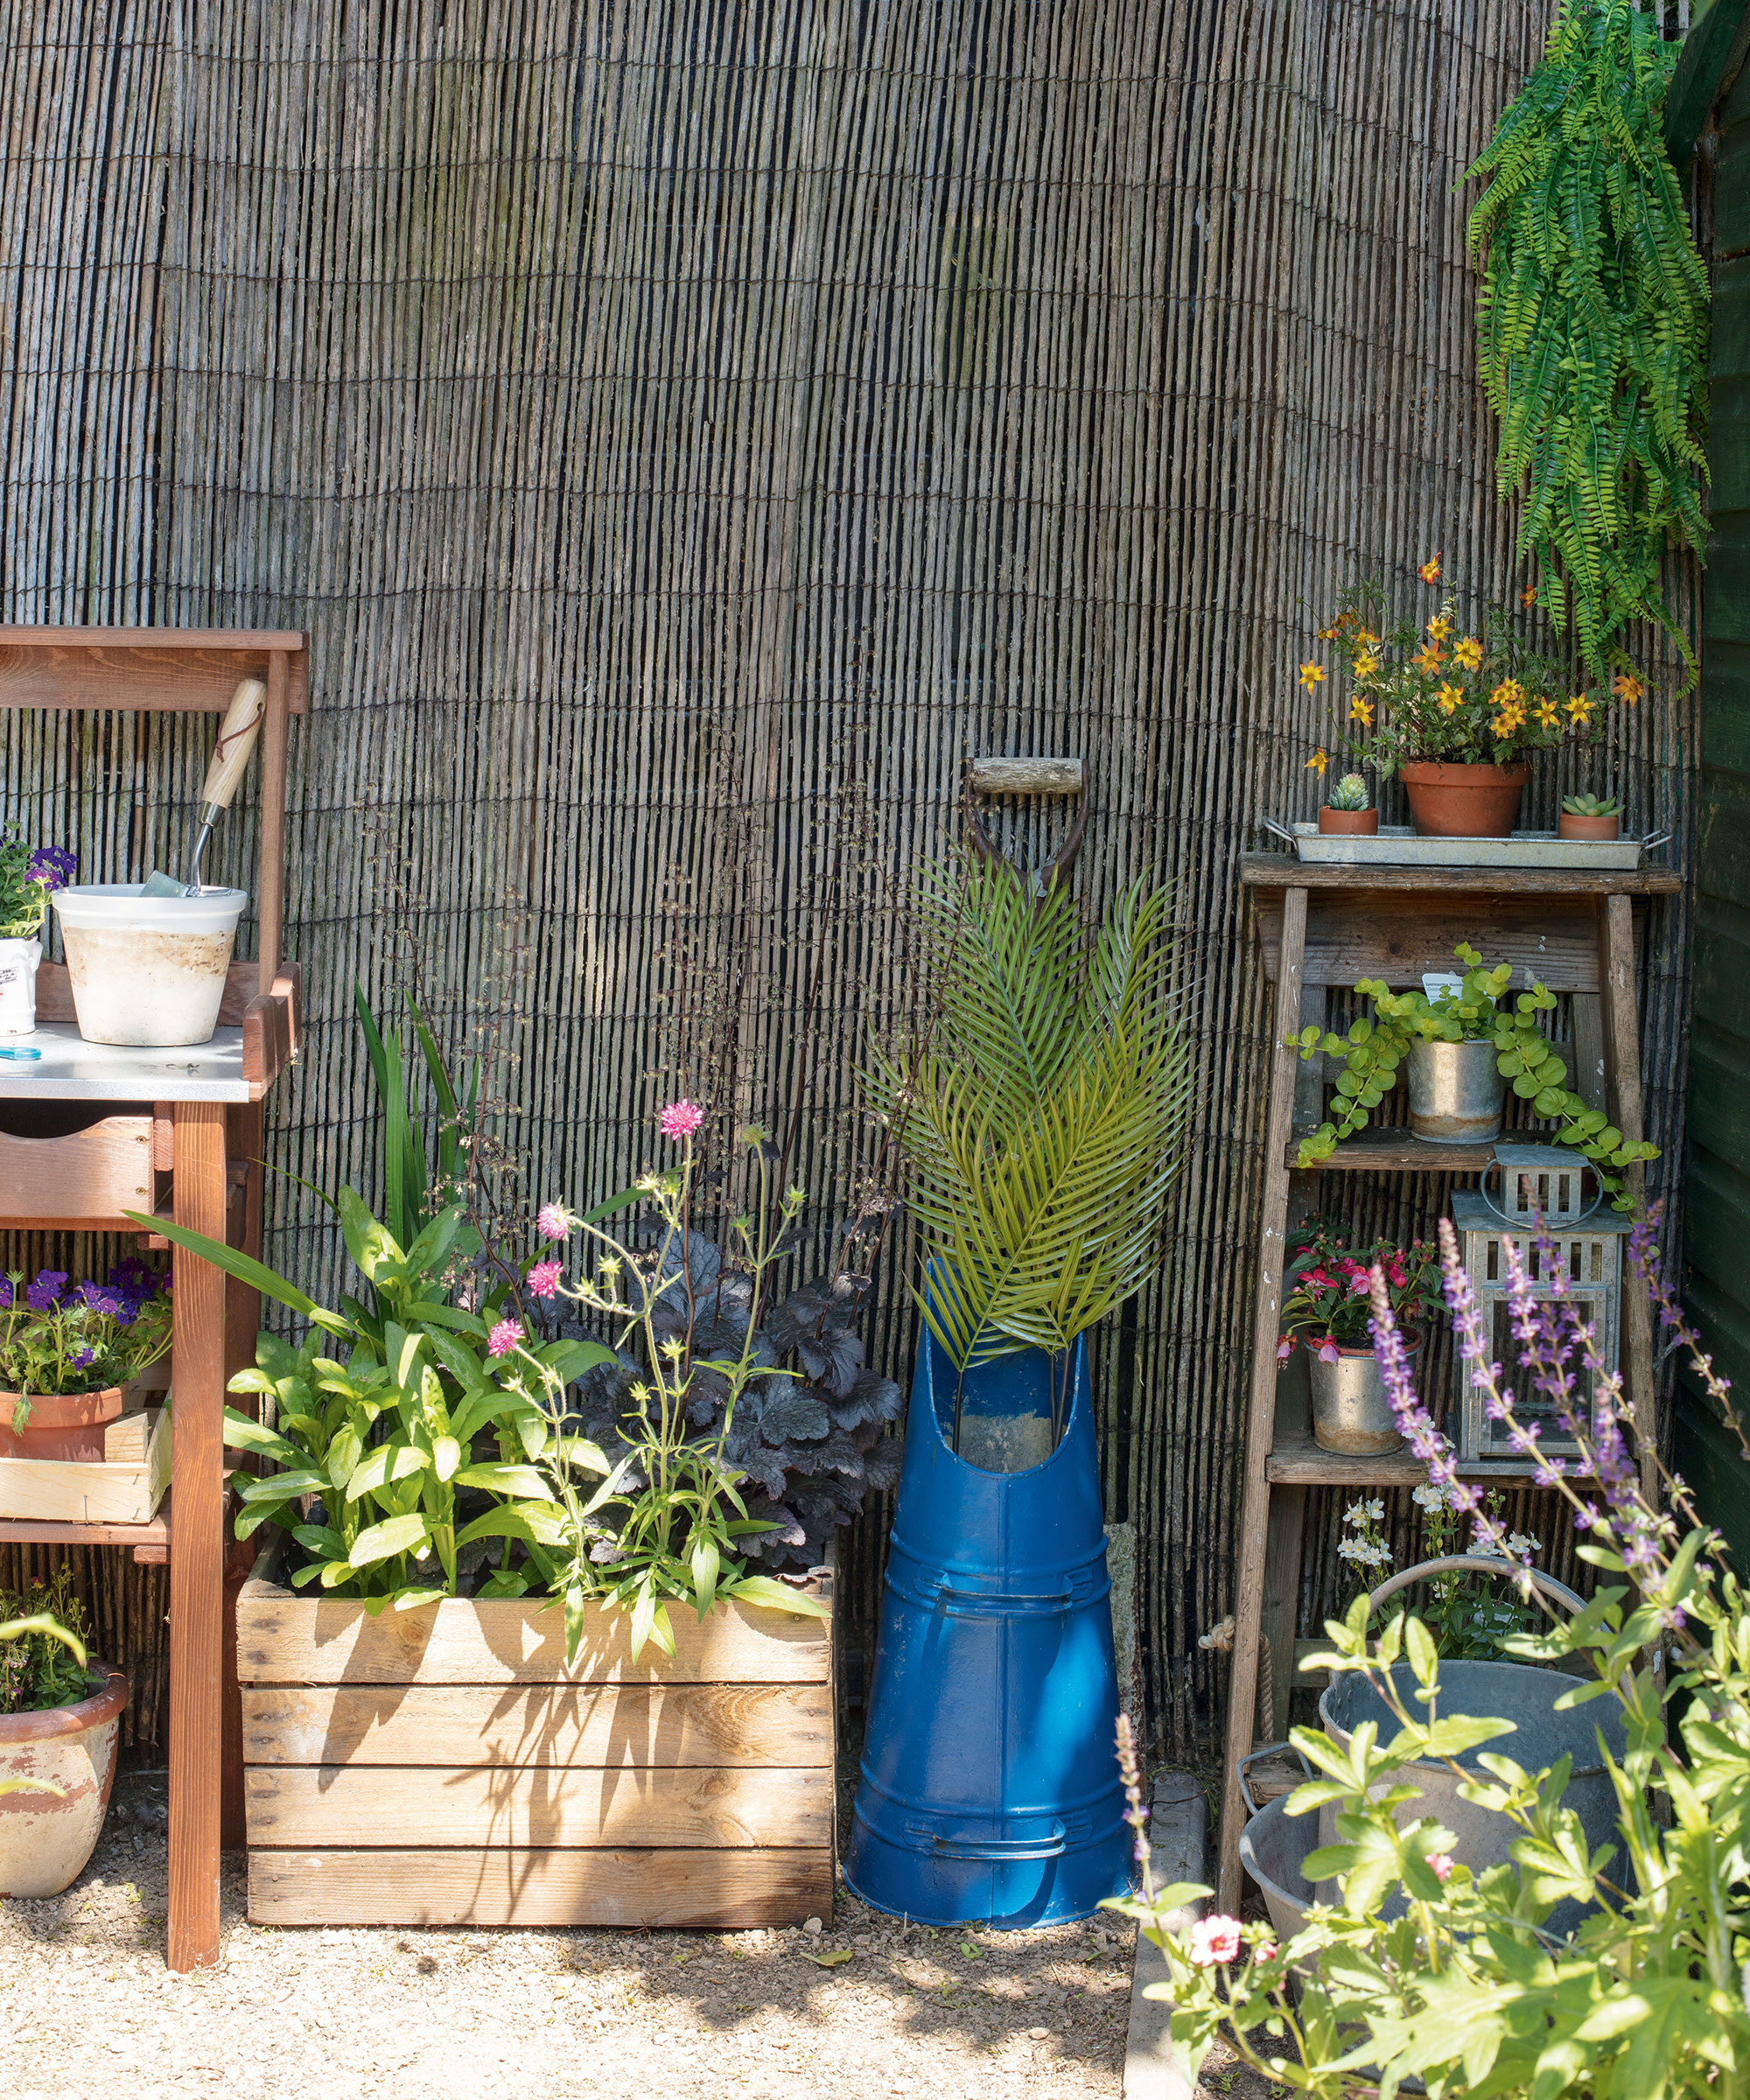 garden area with bamboo fence and flower pots